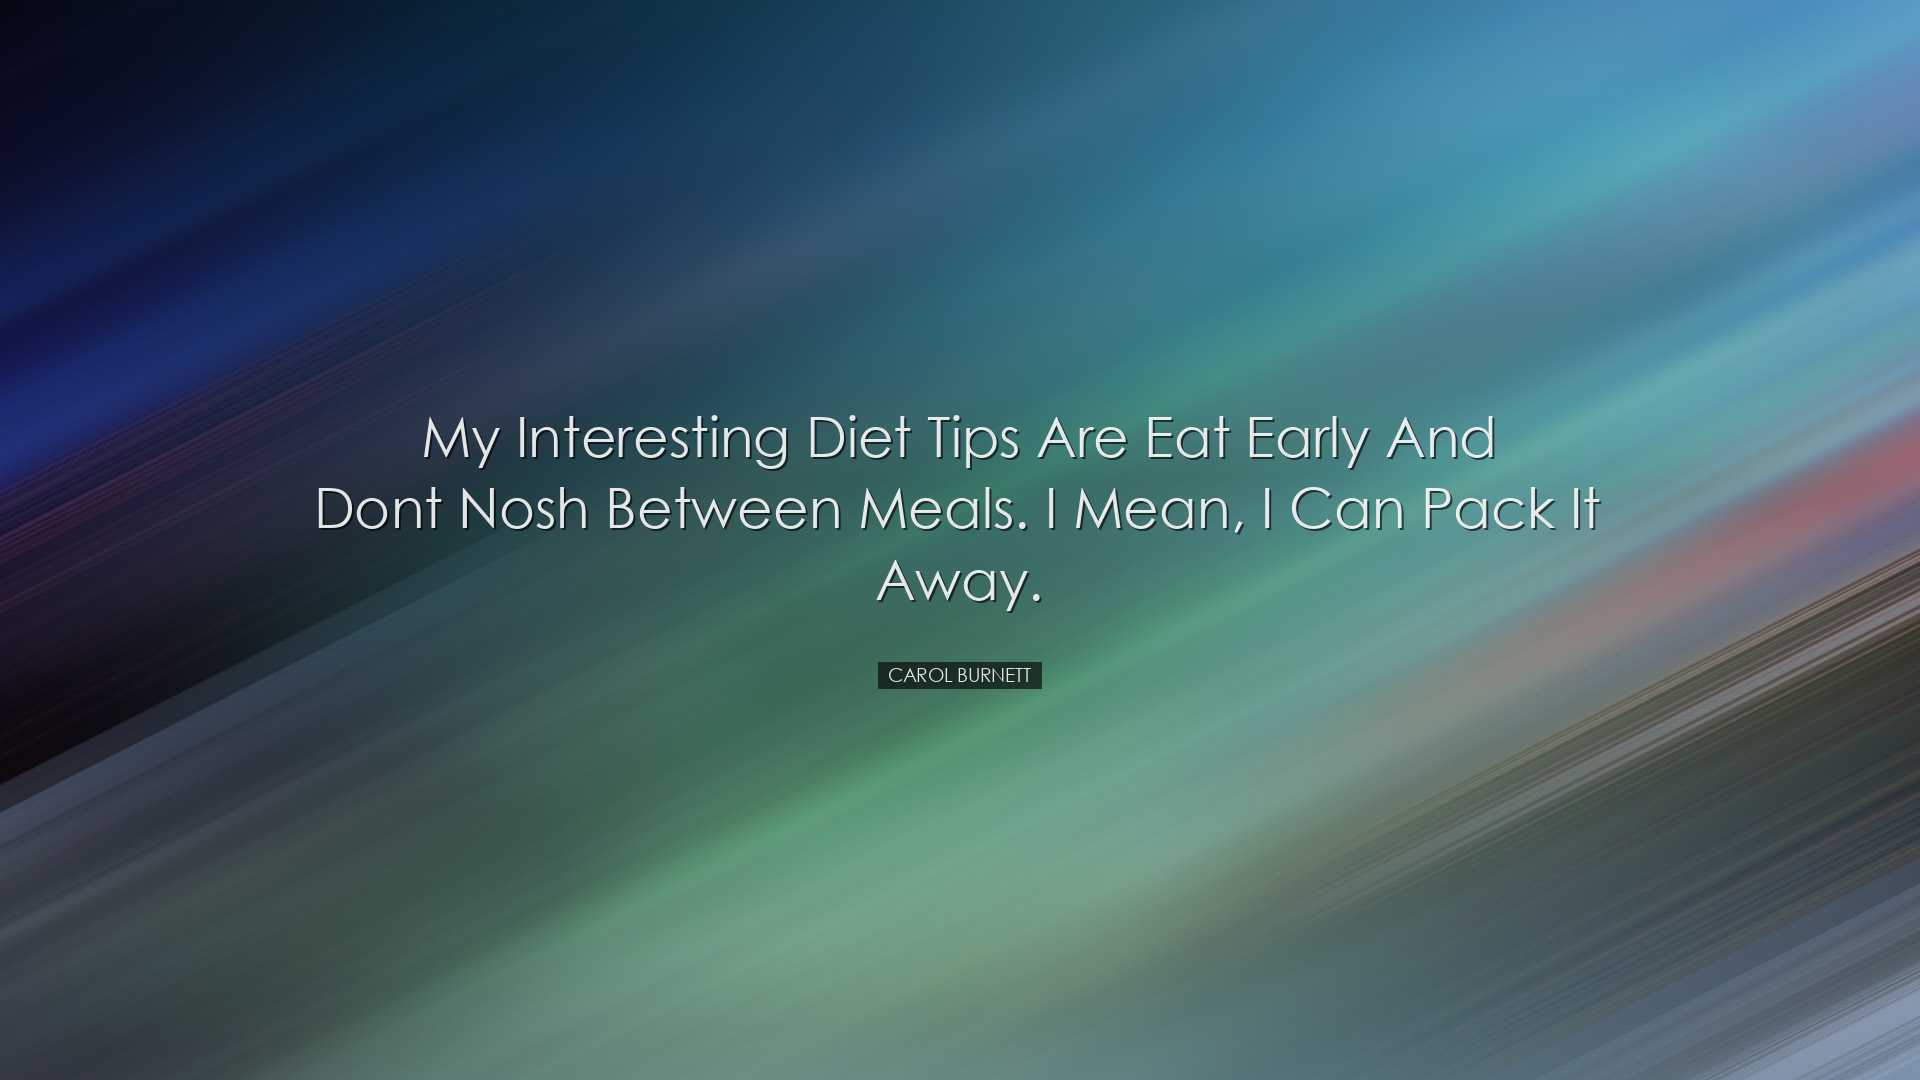 My interesting diet tips are eat early and dont nosh between meals